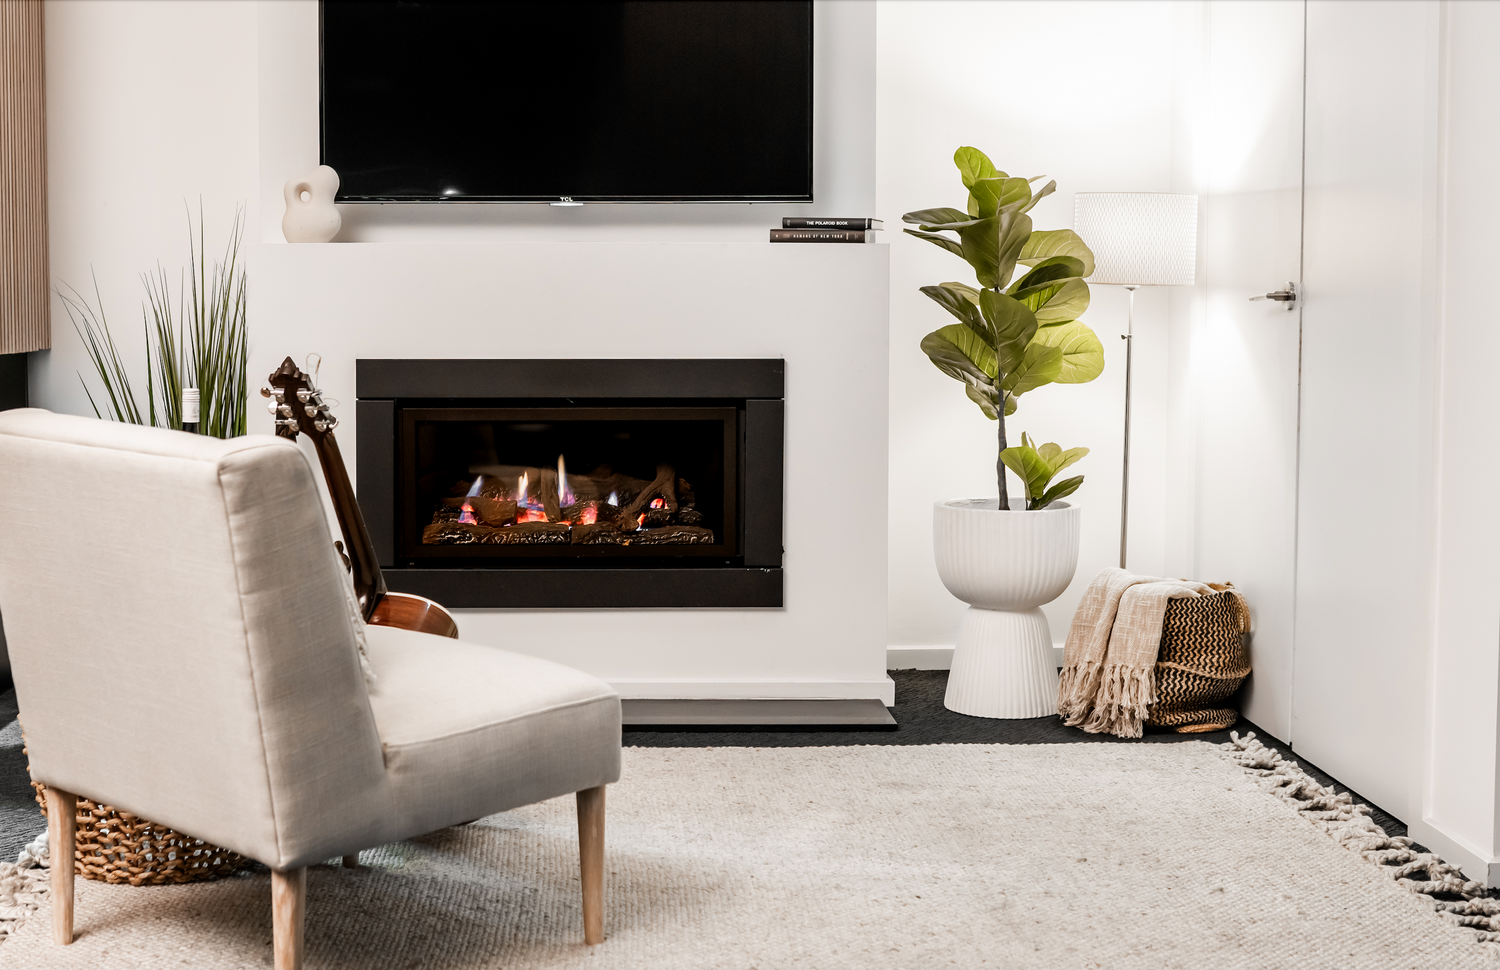 Gas Log Fireplaces vs Electric Fireplaces: Comparing Heating Options